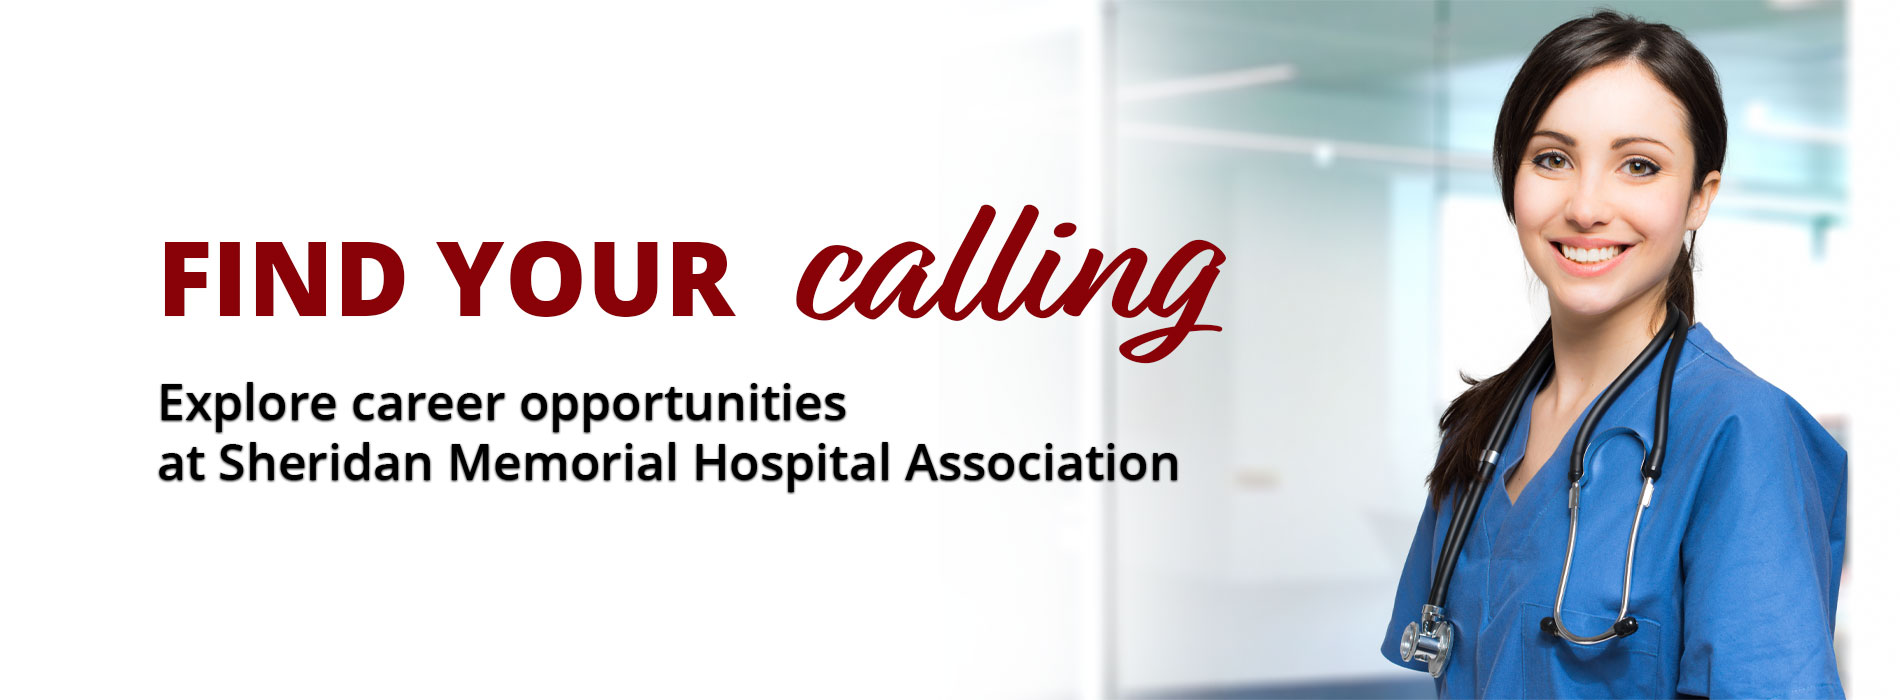 FIND YOUR calling
Explore career opportunities at Sheridan Memorial Hospital Associations.